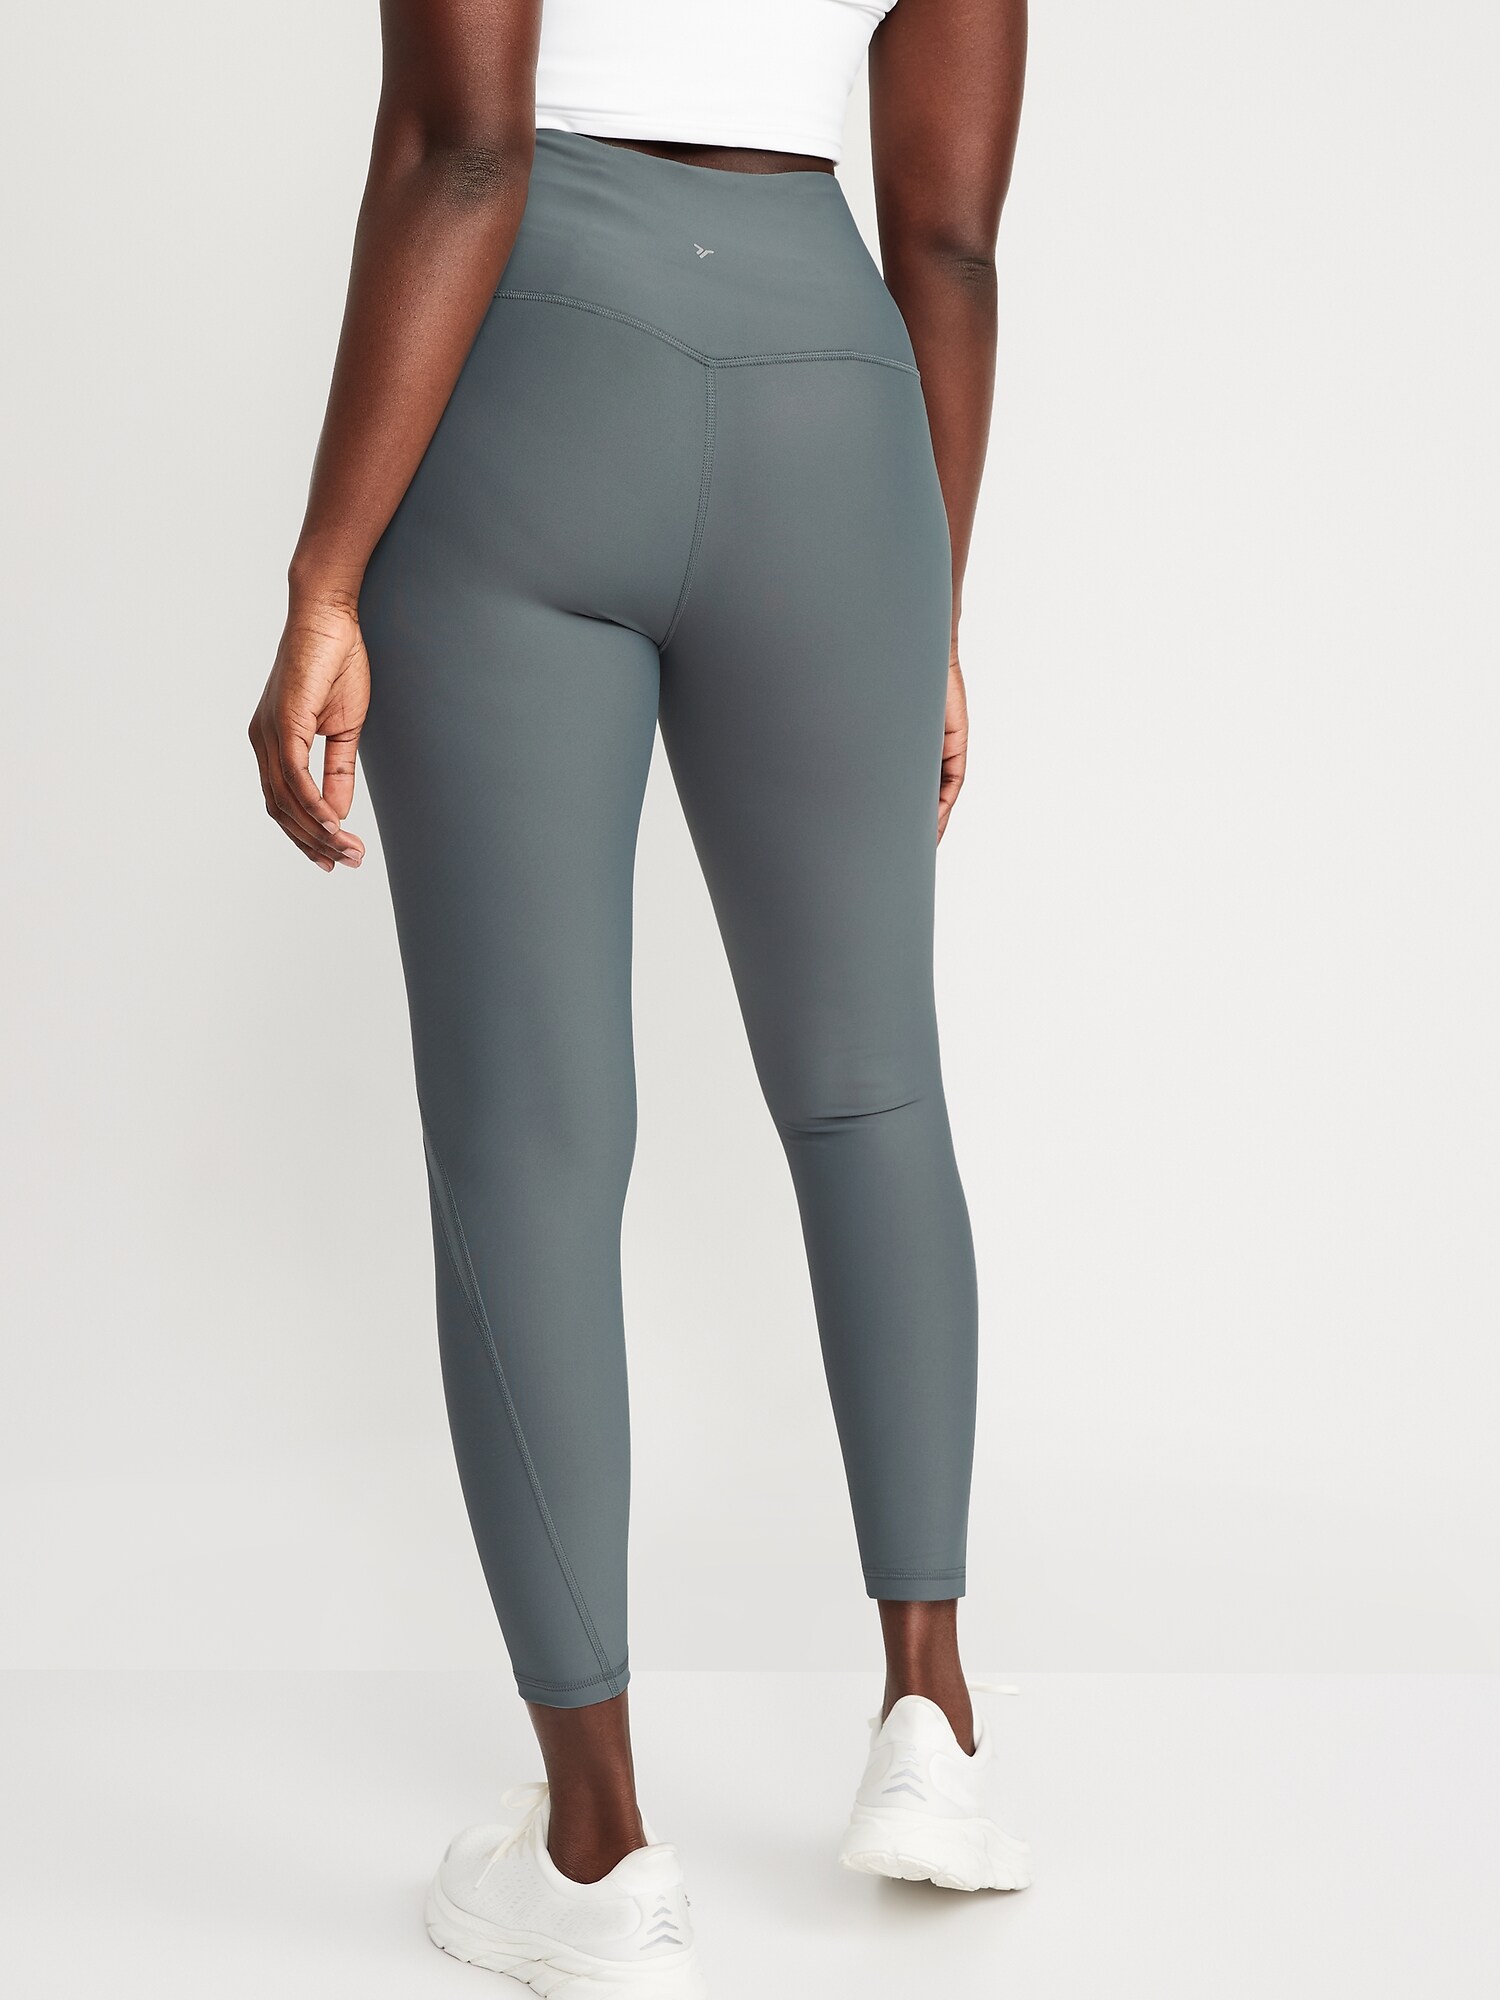 Power Mesh Leggings  Ava Lane Boutique - Women's clothing and accessories